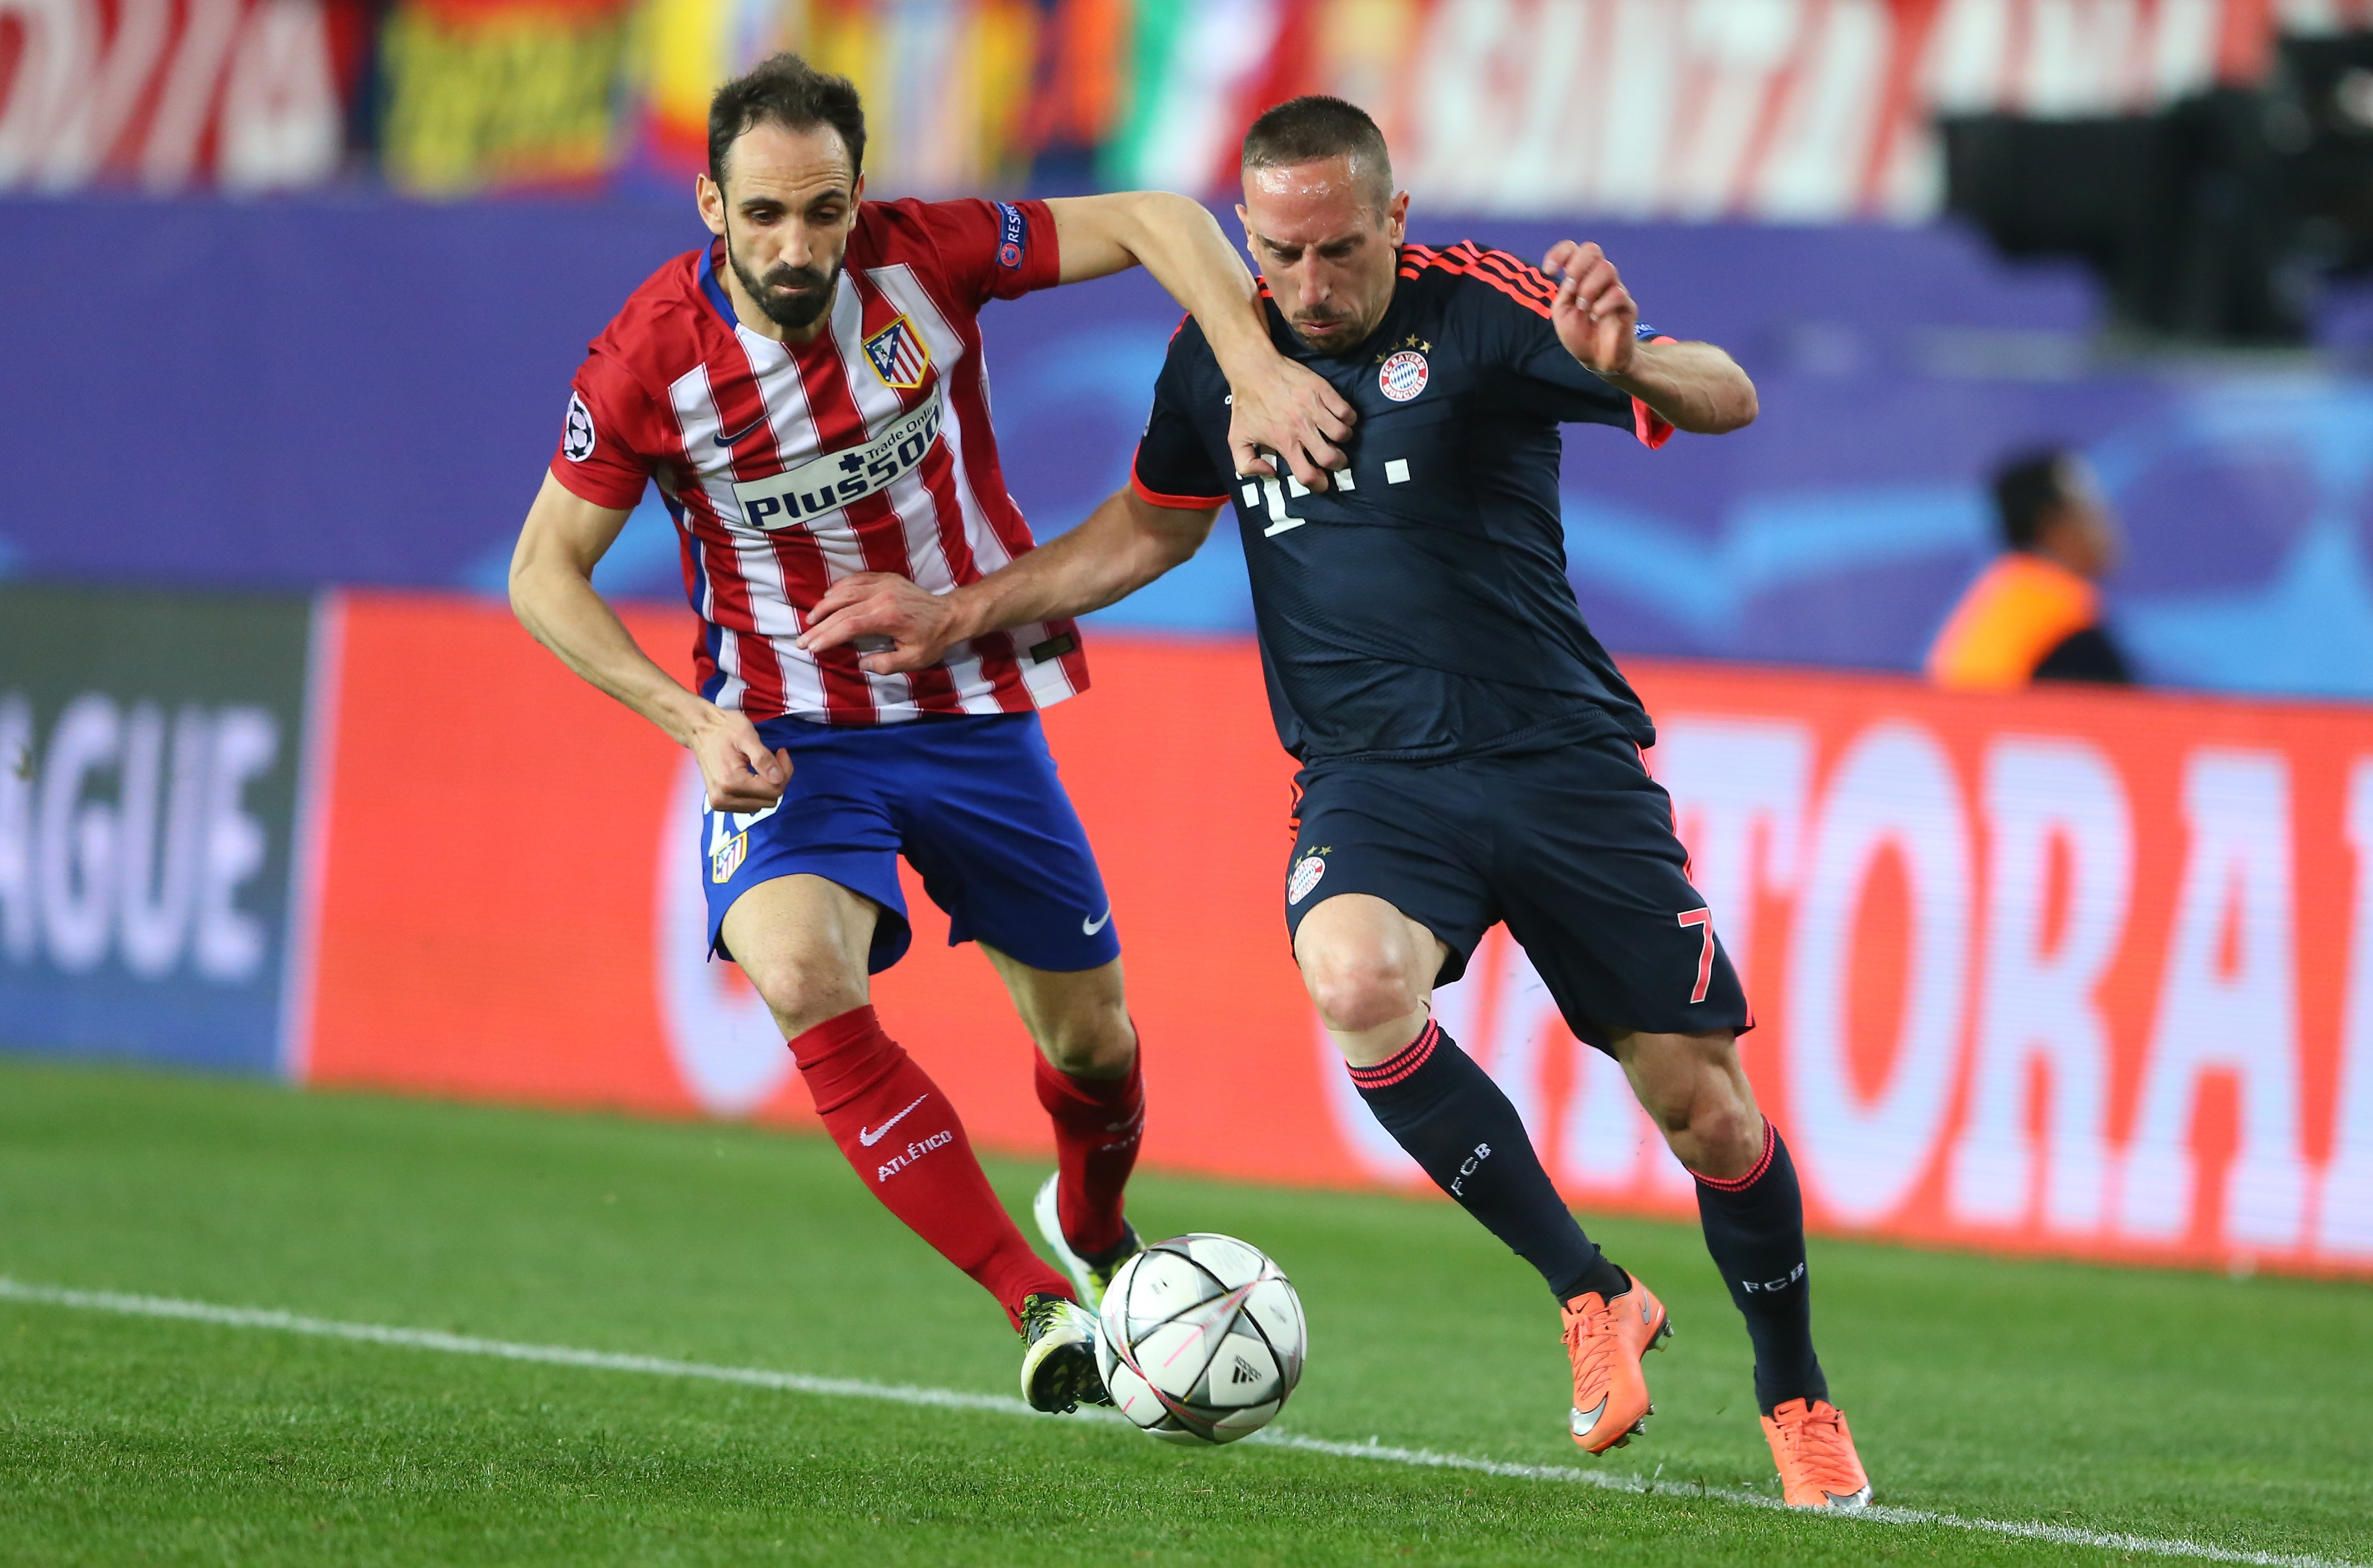 MADRID, SPAIN - APRIL 27:  Juanfran of Atletico Madrid chases down Franck Ribery of Bayern Munich   during the UEFA Champions League semi final first leg match between Club Atletico de Madrid and FC Bayern Muenchen at Vincente Calderon on April 27, 2016 in Madrid, Spain.  (Photo by Alexander Hassenstein/Bongarts/Getty Images)